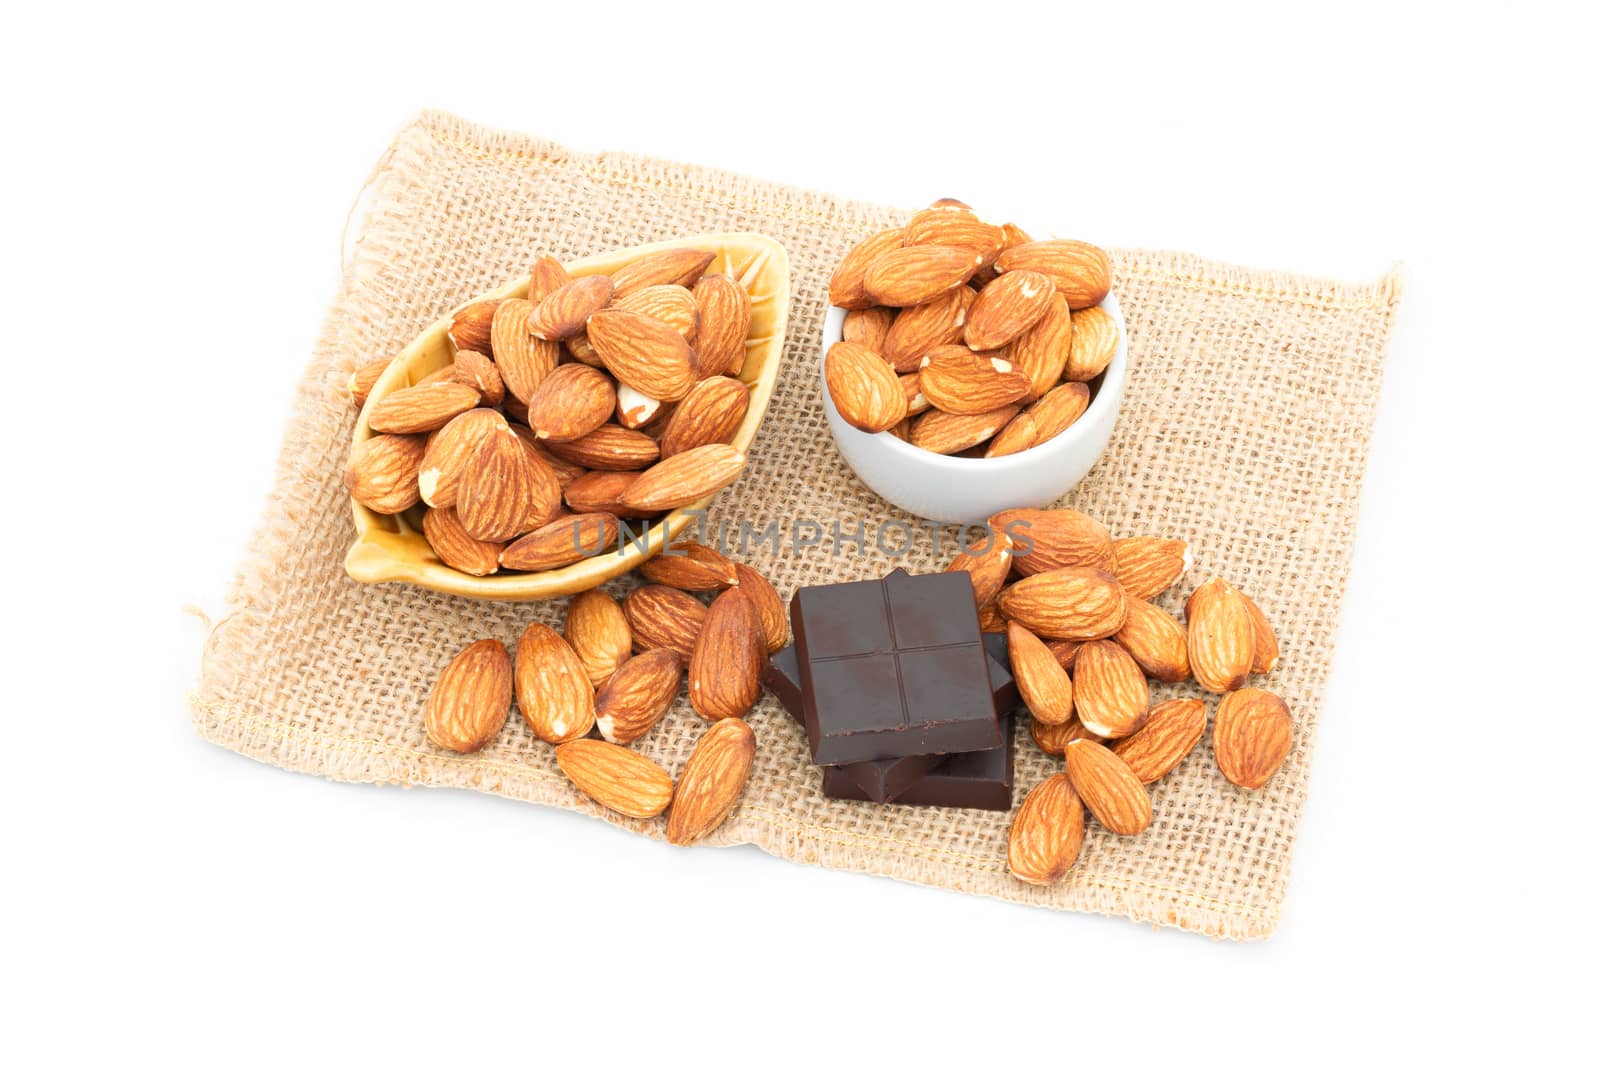 chocolate and almonds on a white background